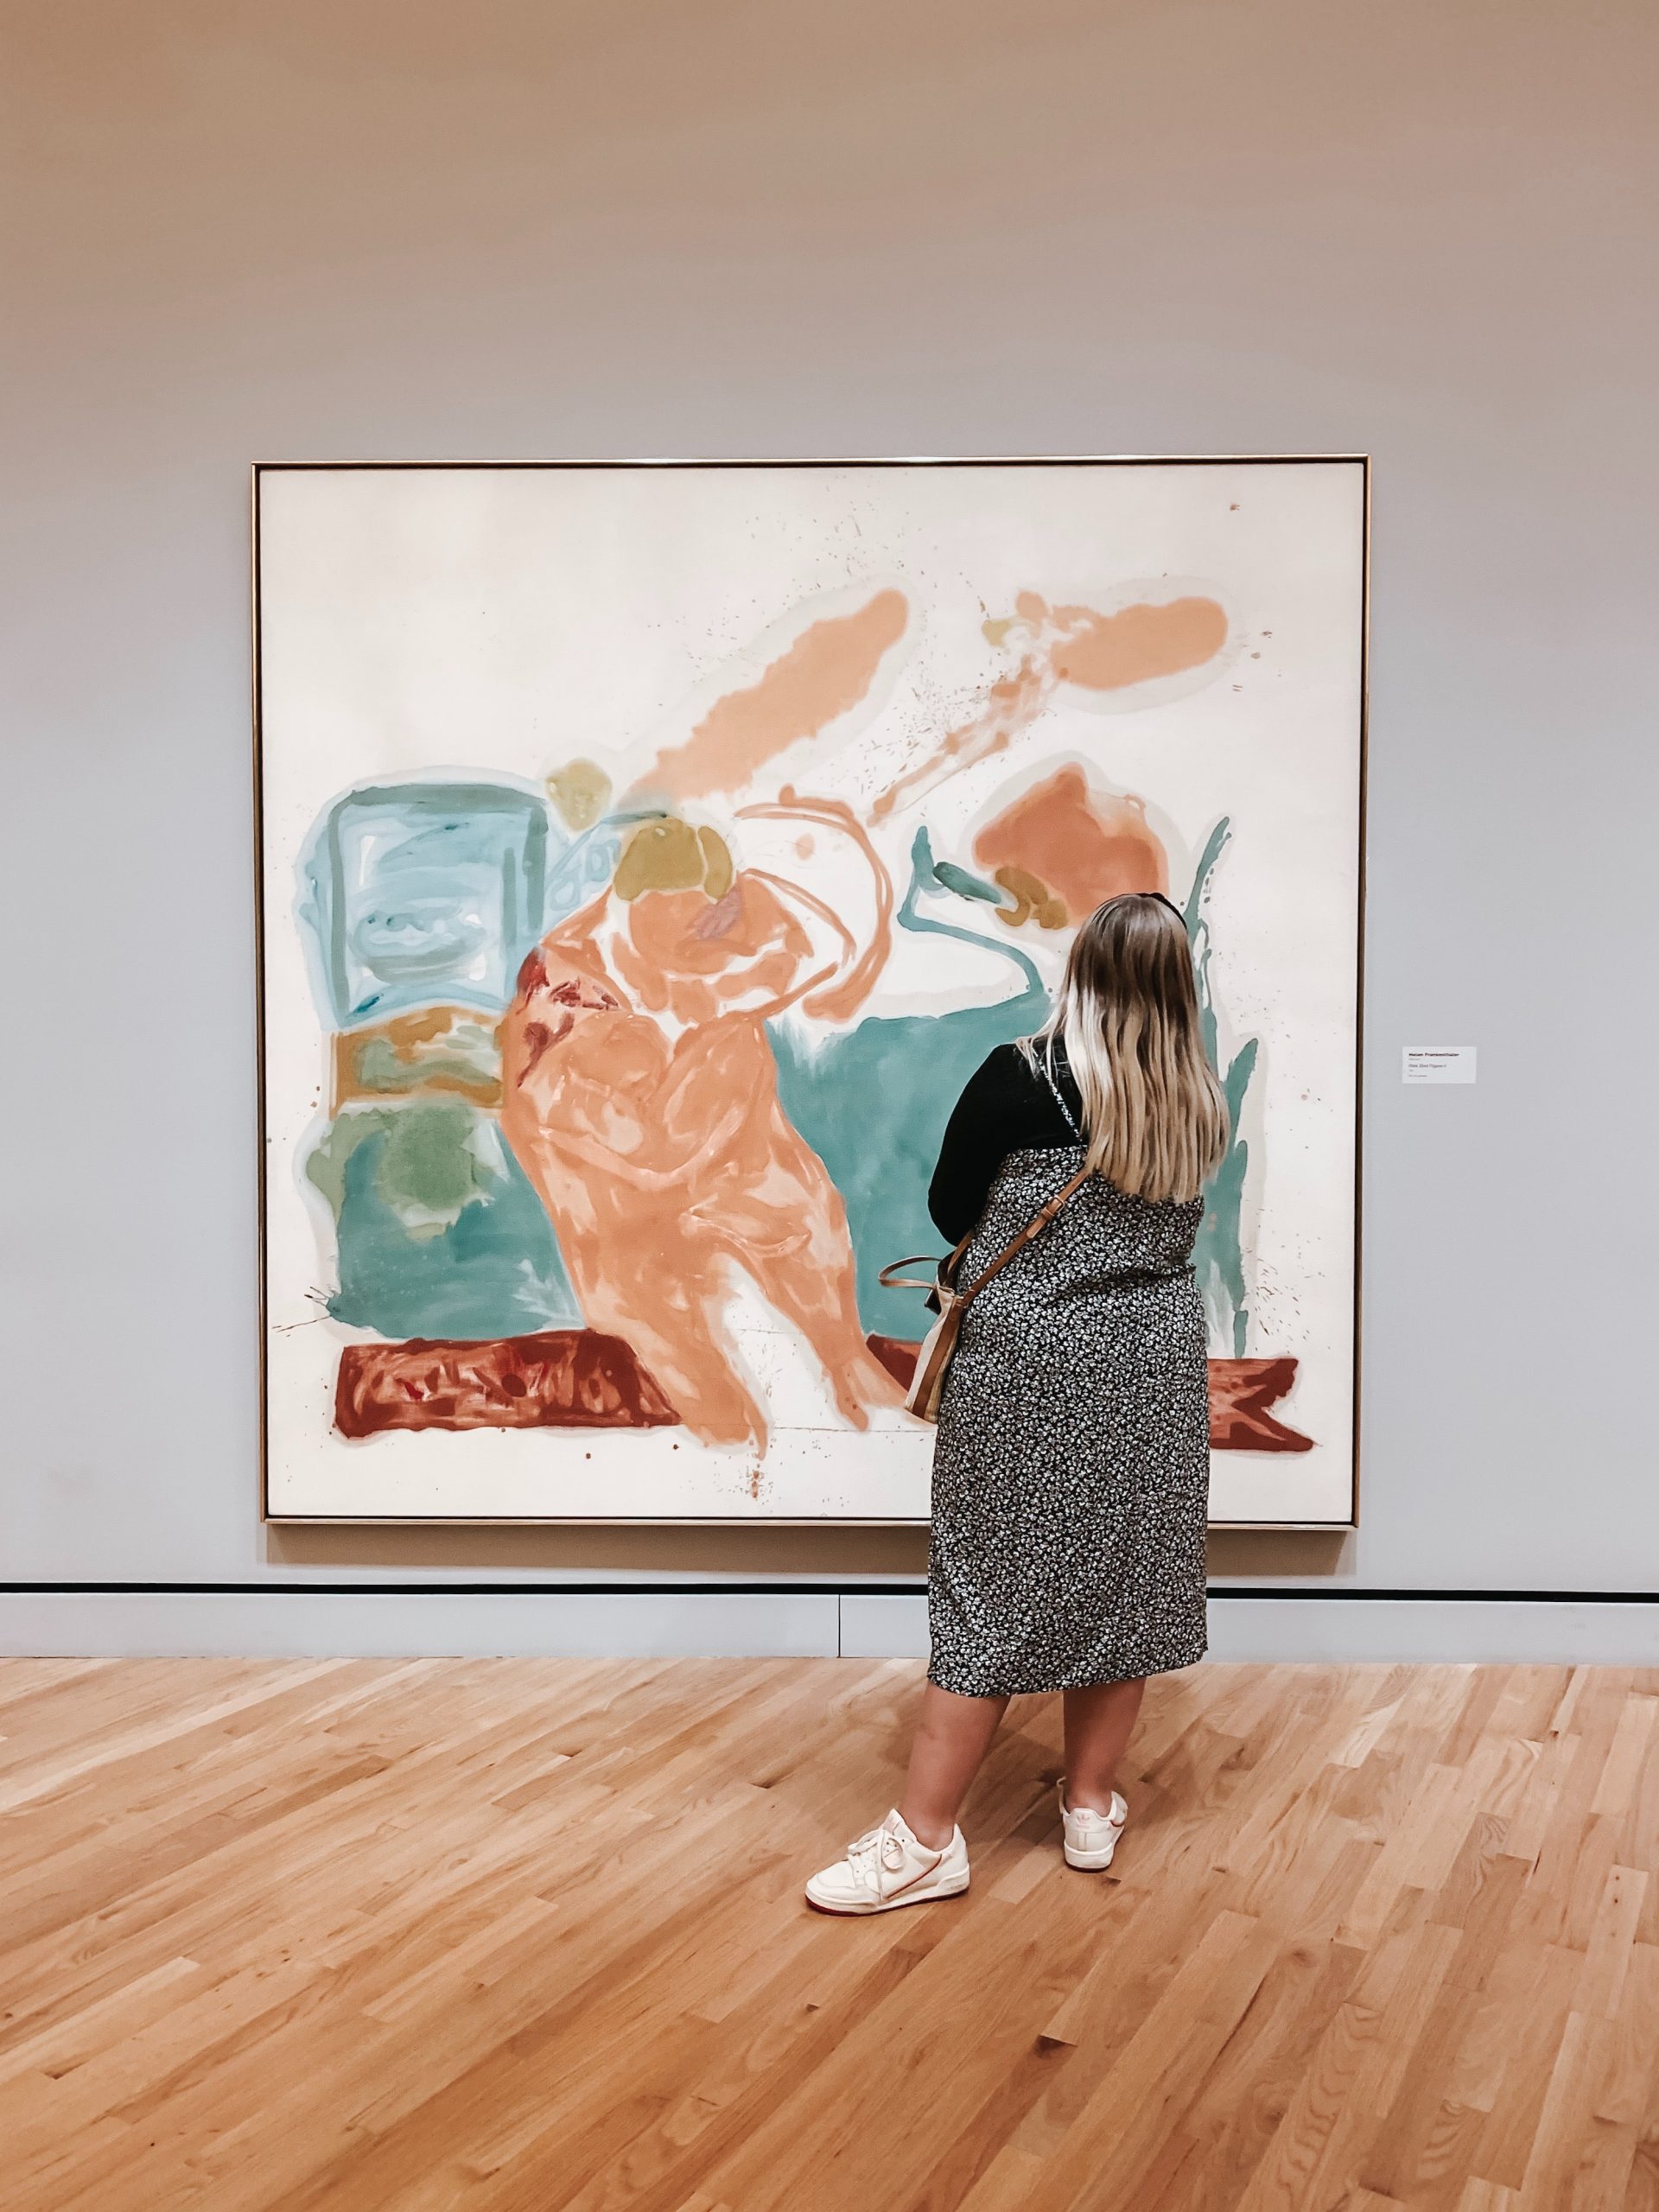 A woman in a gallery intrigued by a painting of abstract art.